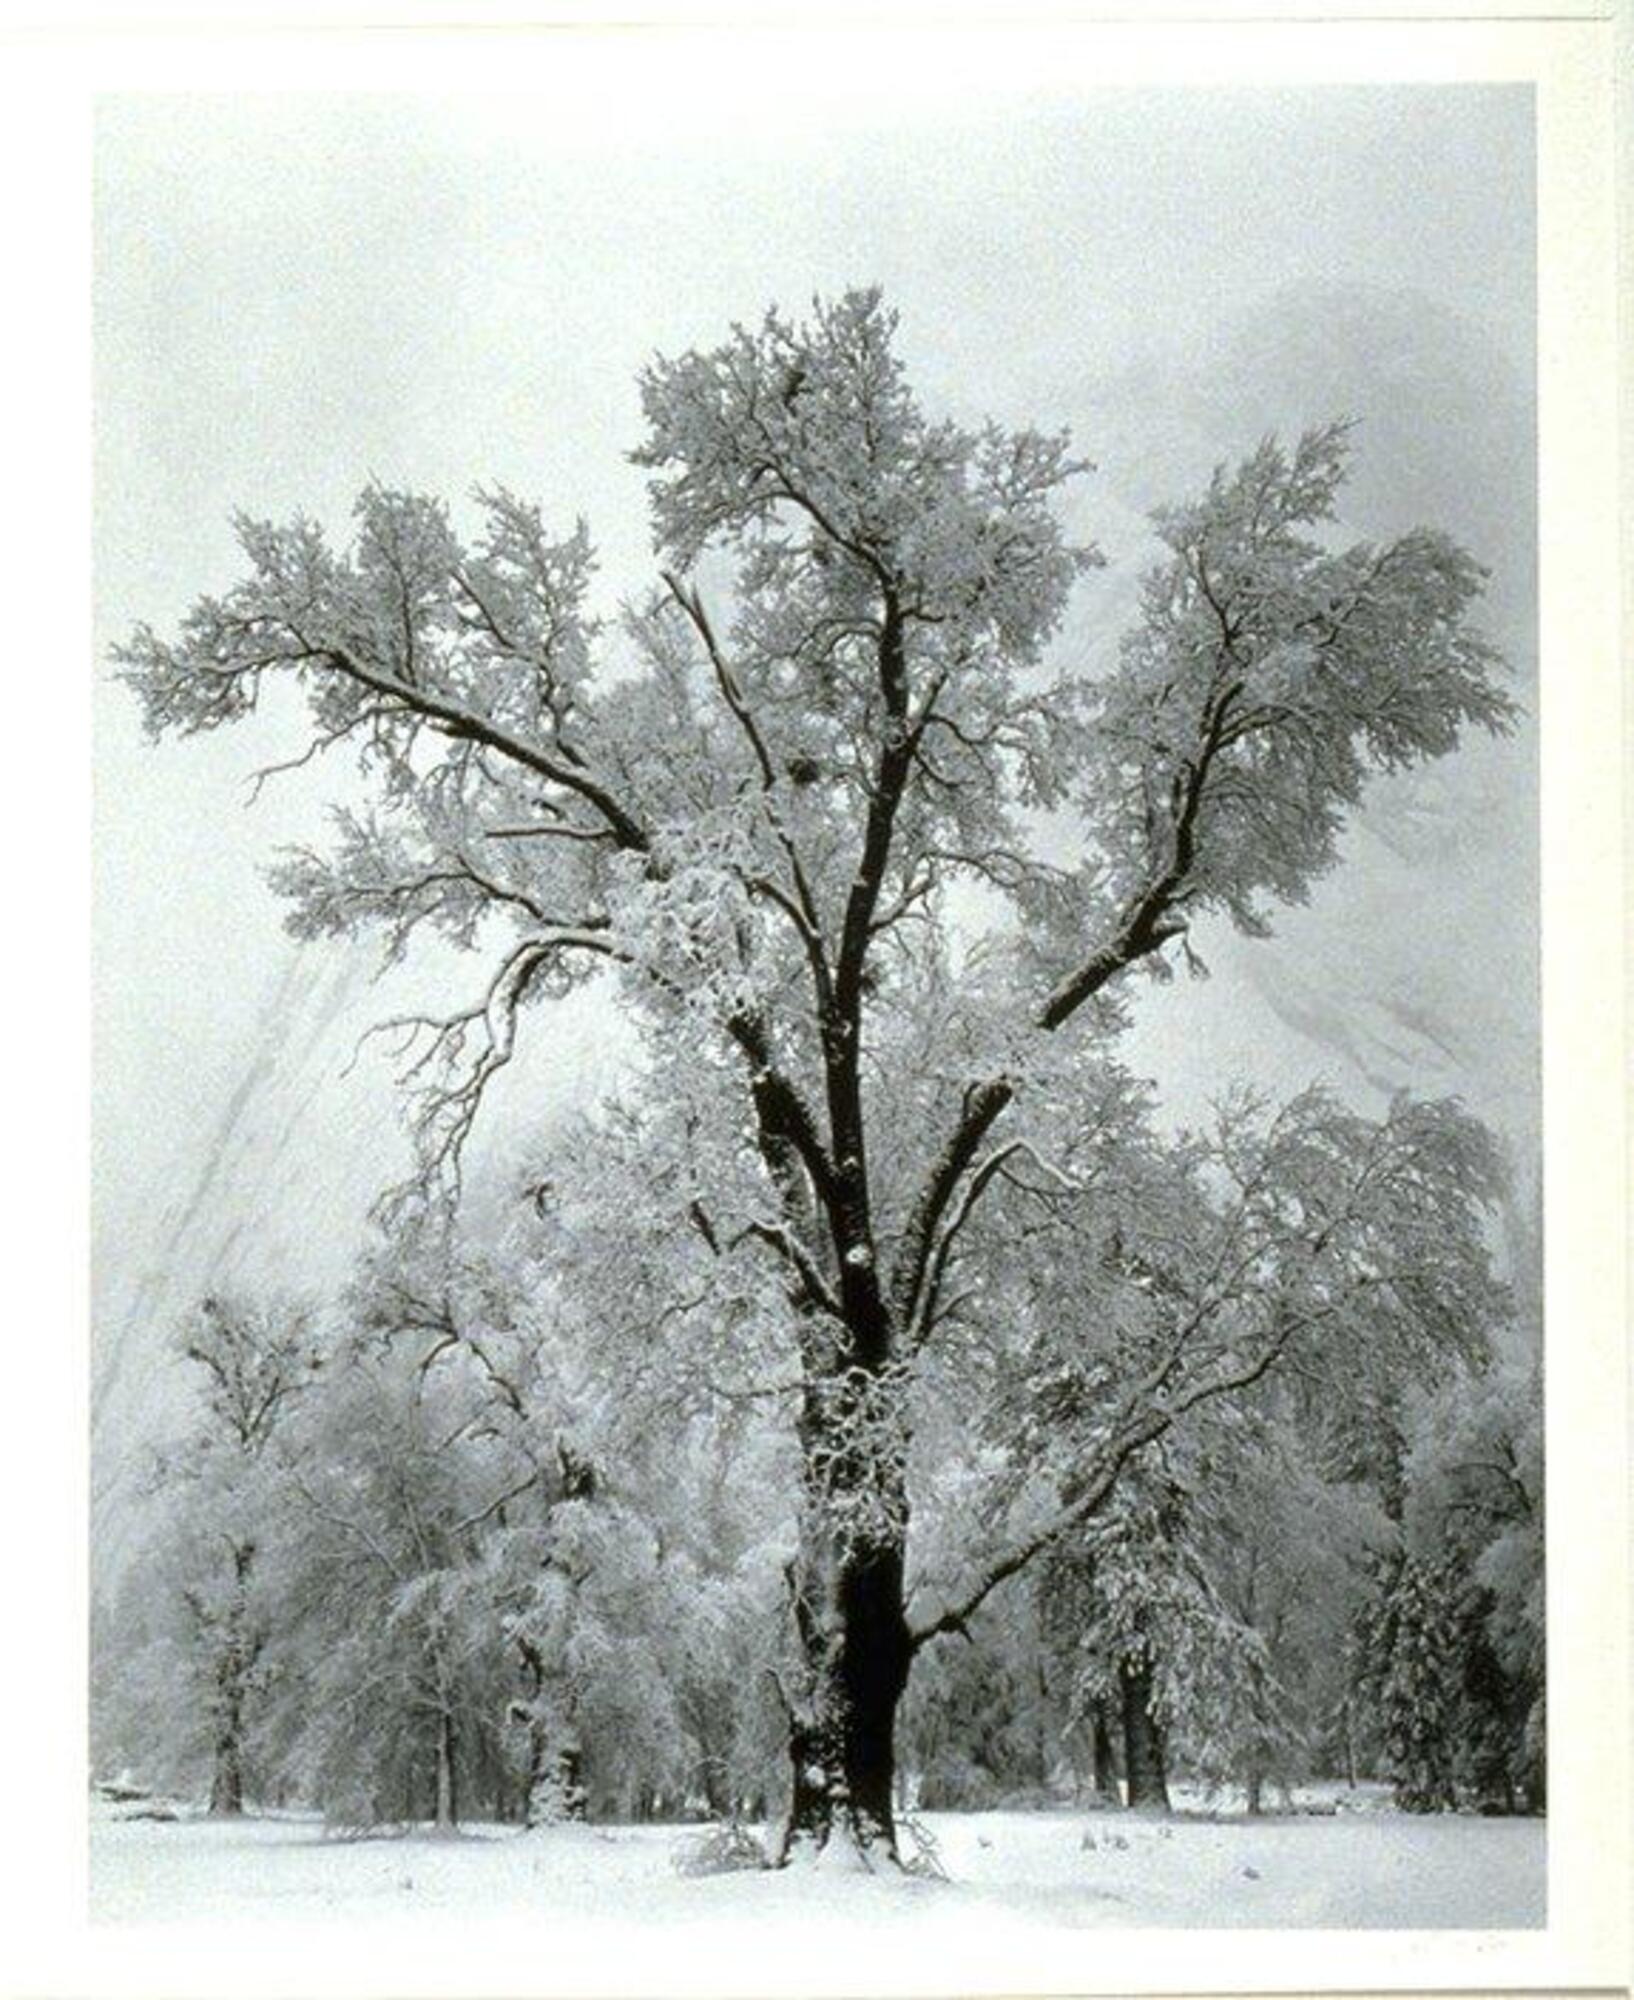 This photograph depicts a snow-covered oak tree in a clearing during a winter snowstorm.